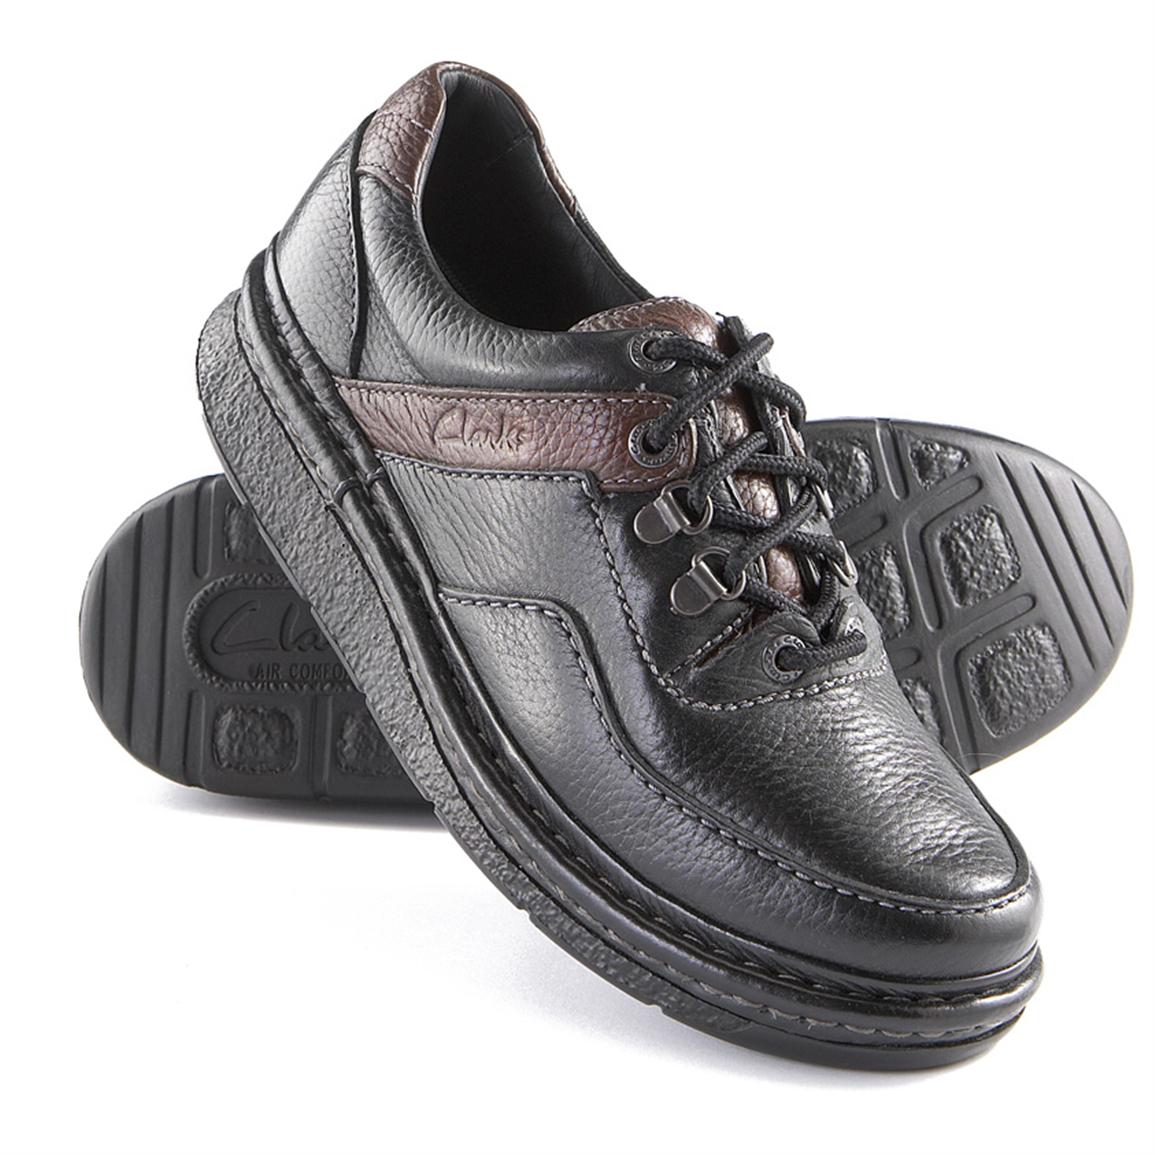 clarks air mover shoes off 77% - online 